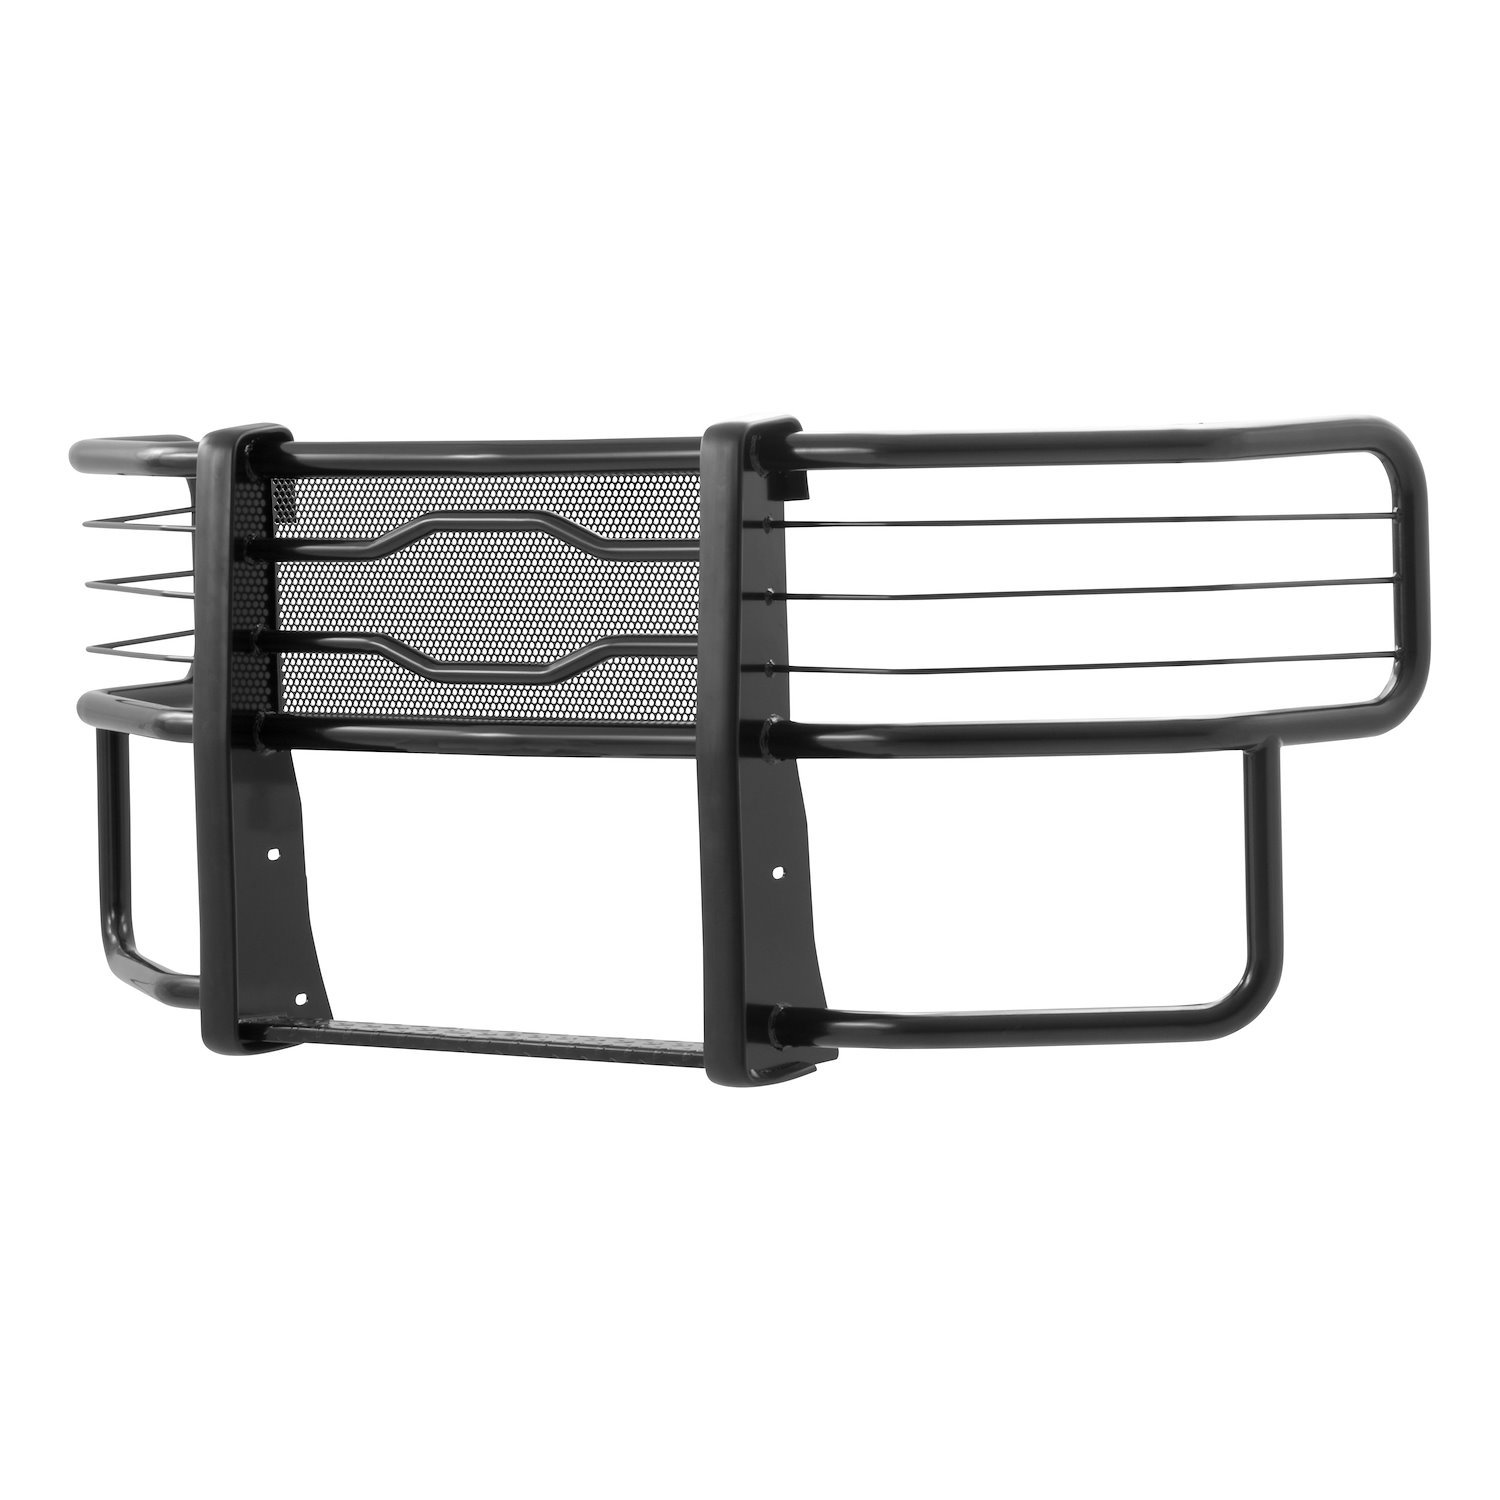 320713 Prowler Max Black Steel Grille Guard, Without Brackets